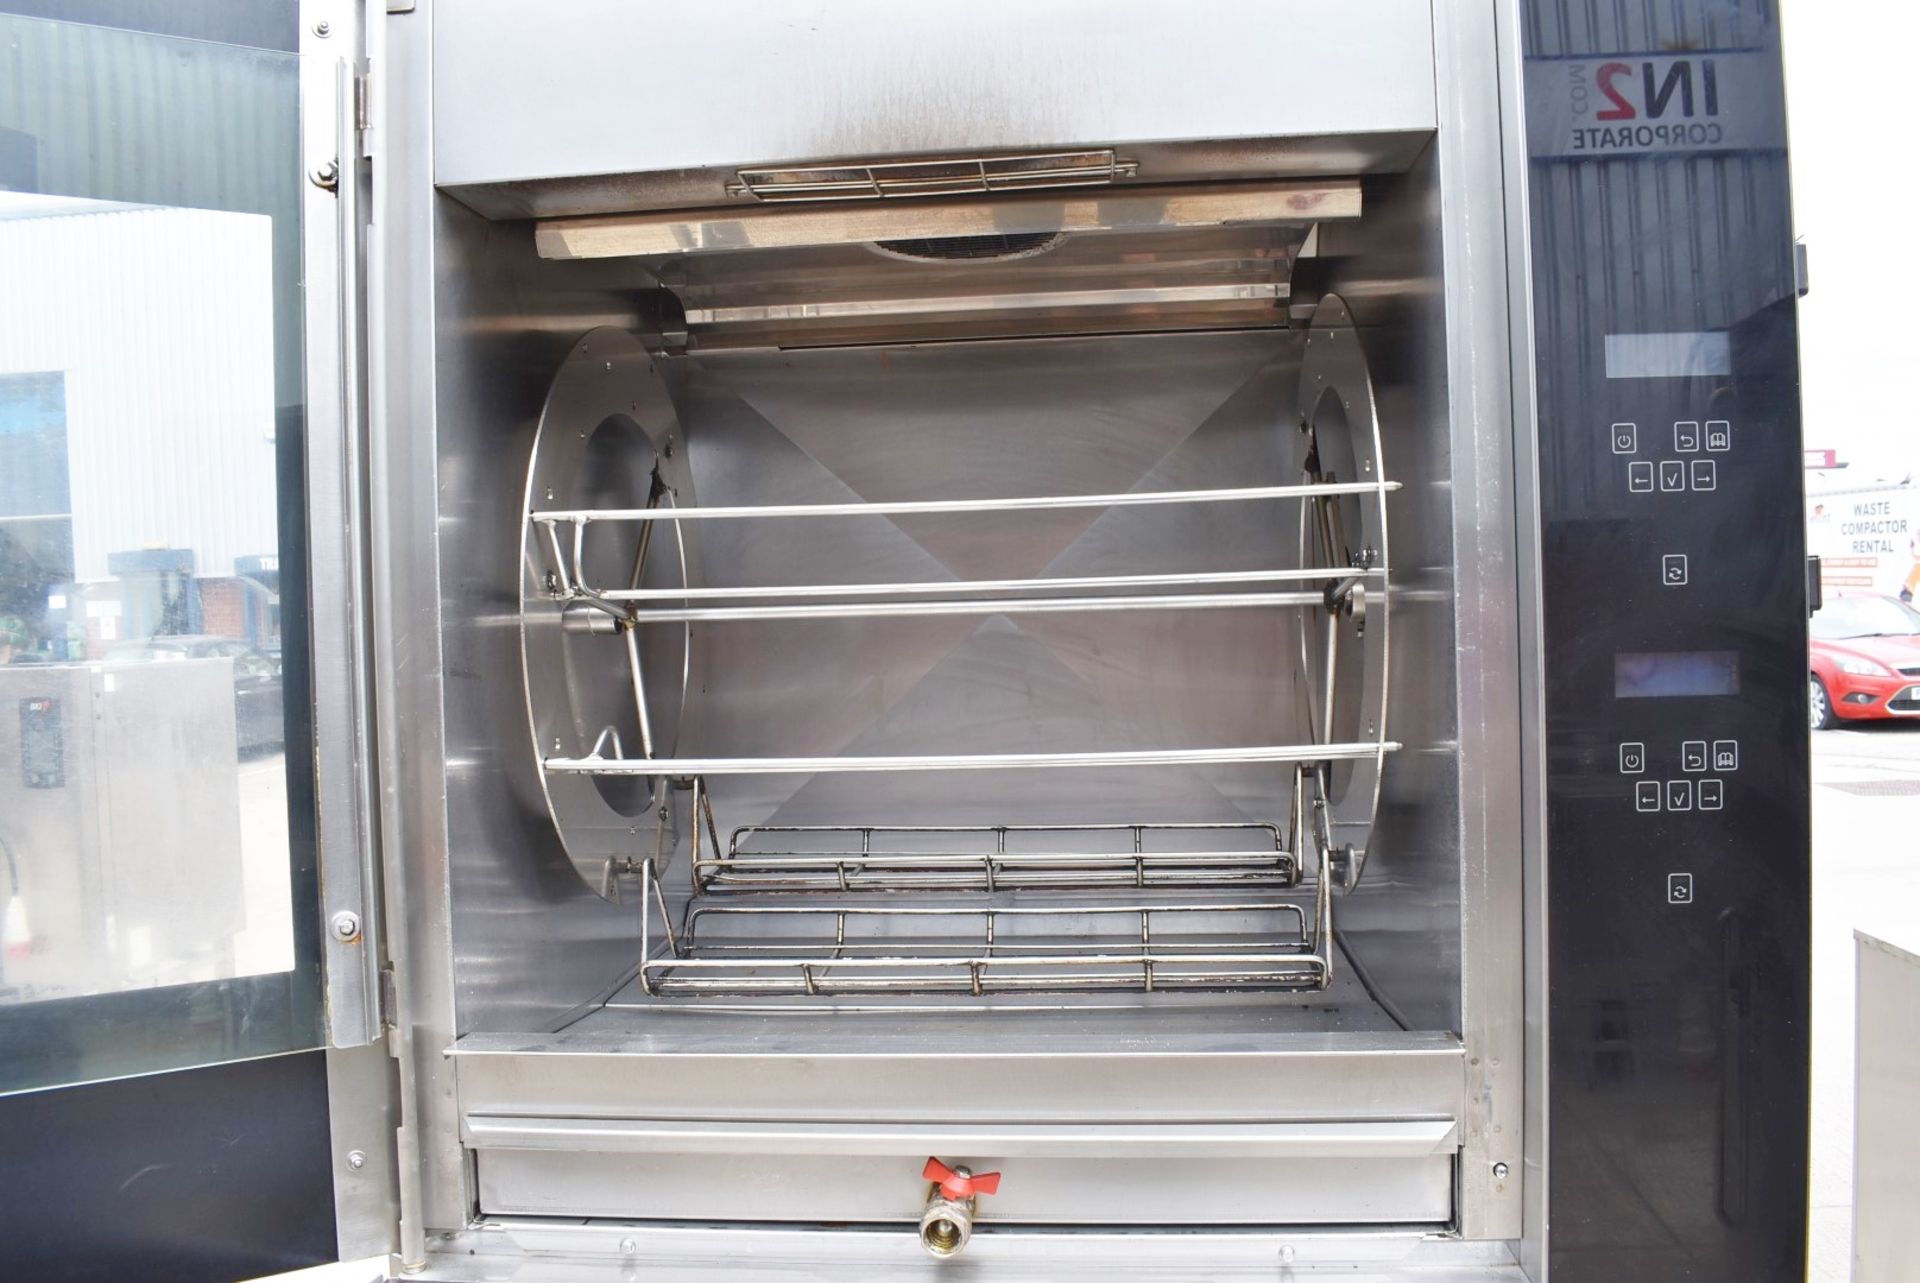 1 x Frijado 80 Chicken Rotisserie Programmable Double Oven - 3 Phase - Model: TDR 8+8P - RRP £21,000 - Image 10 of 17